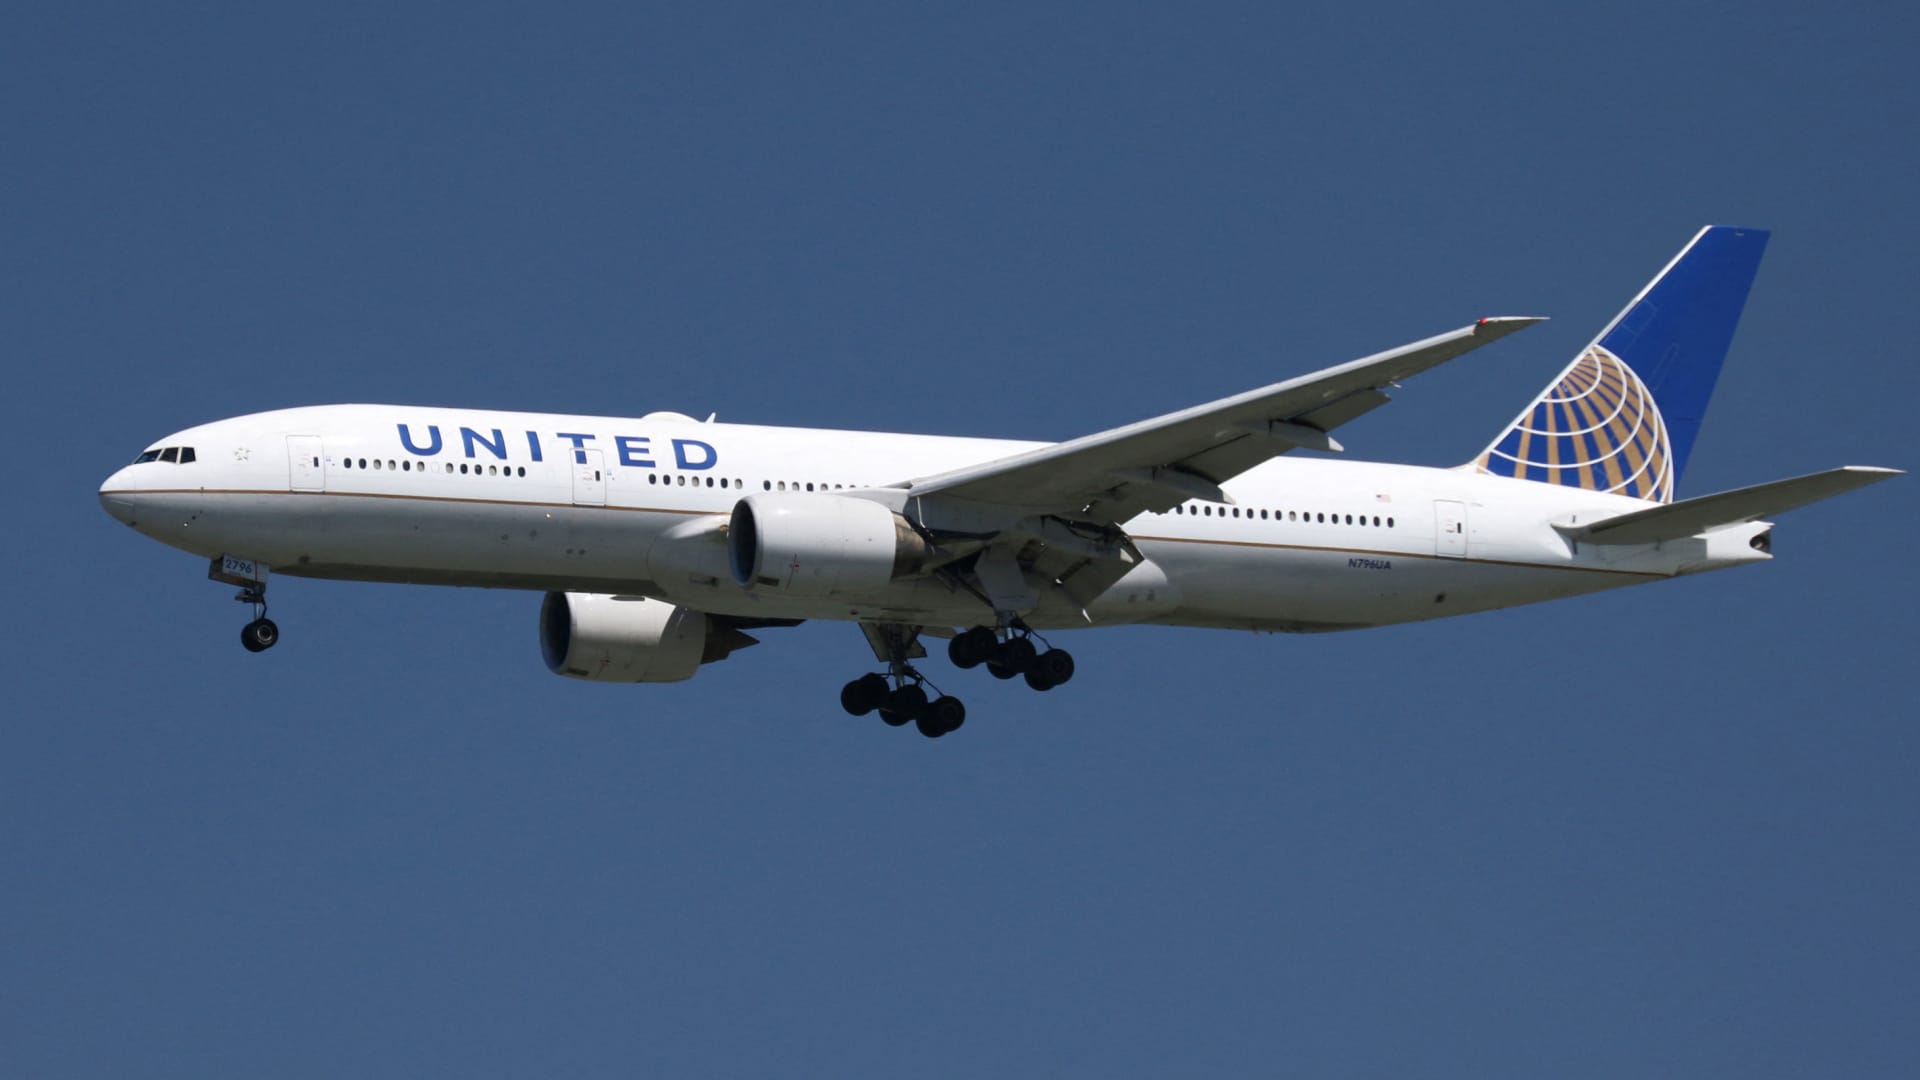 United  Airlines  Gave  Pilots  5%  Raise  Early  After Union  Rejected  Contract  Proposal  But  Pilots  Are  Looking  For  The  Perfect  Deal !